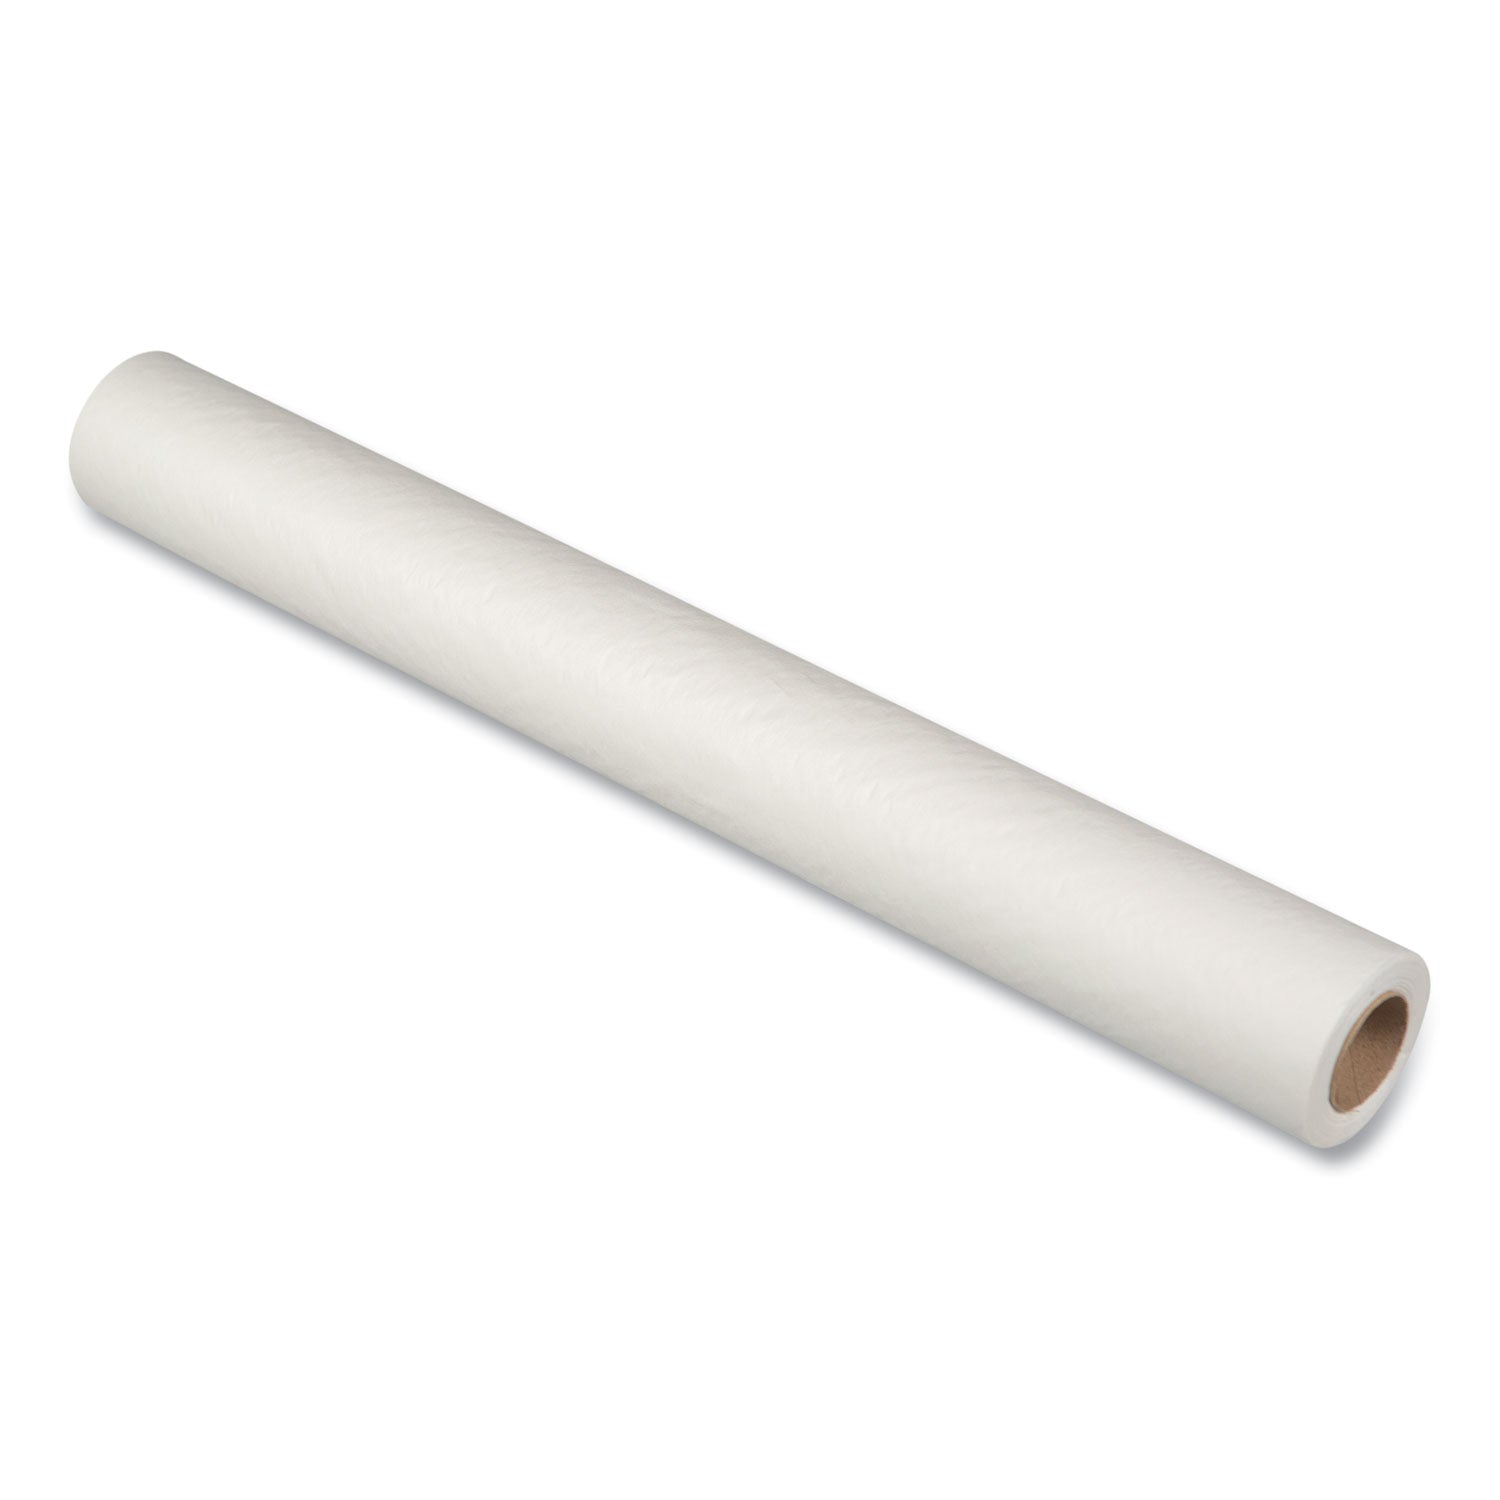 everyday-exam-table-paper-roll-smooth-finish-21-x-225-ft-white-12-carton_bhc980914m - 1